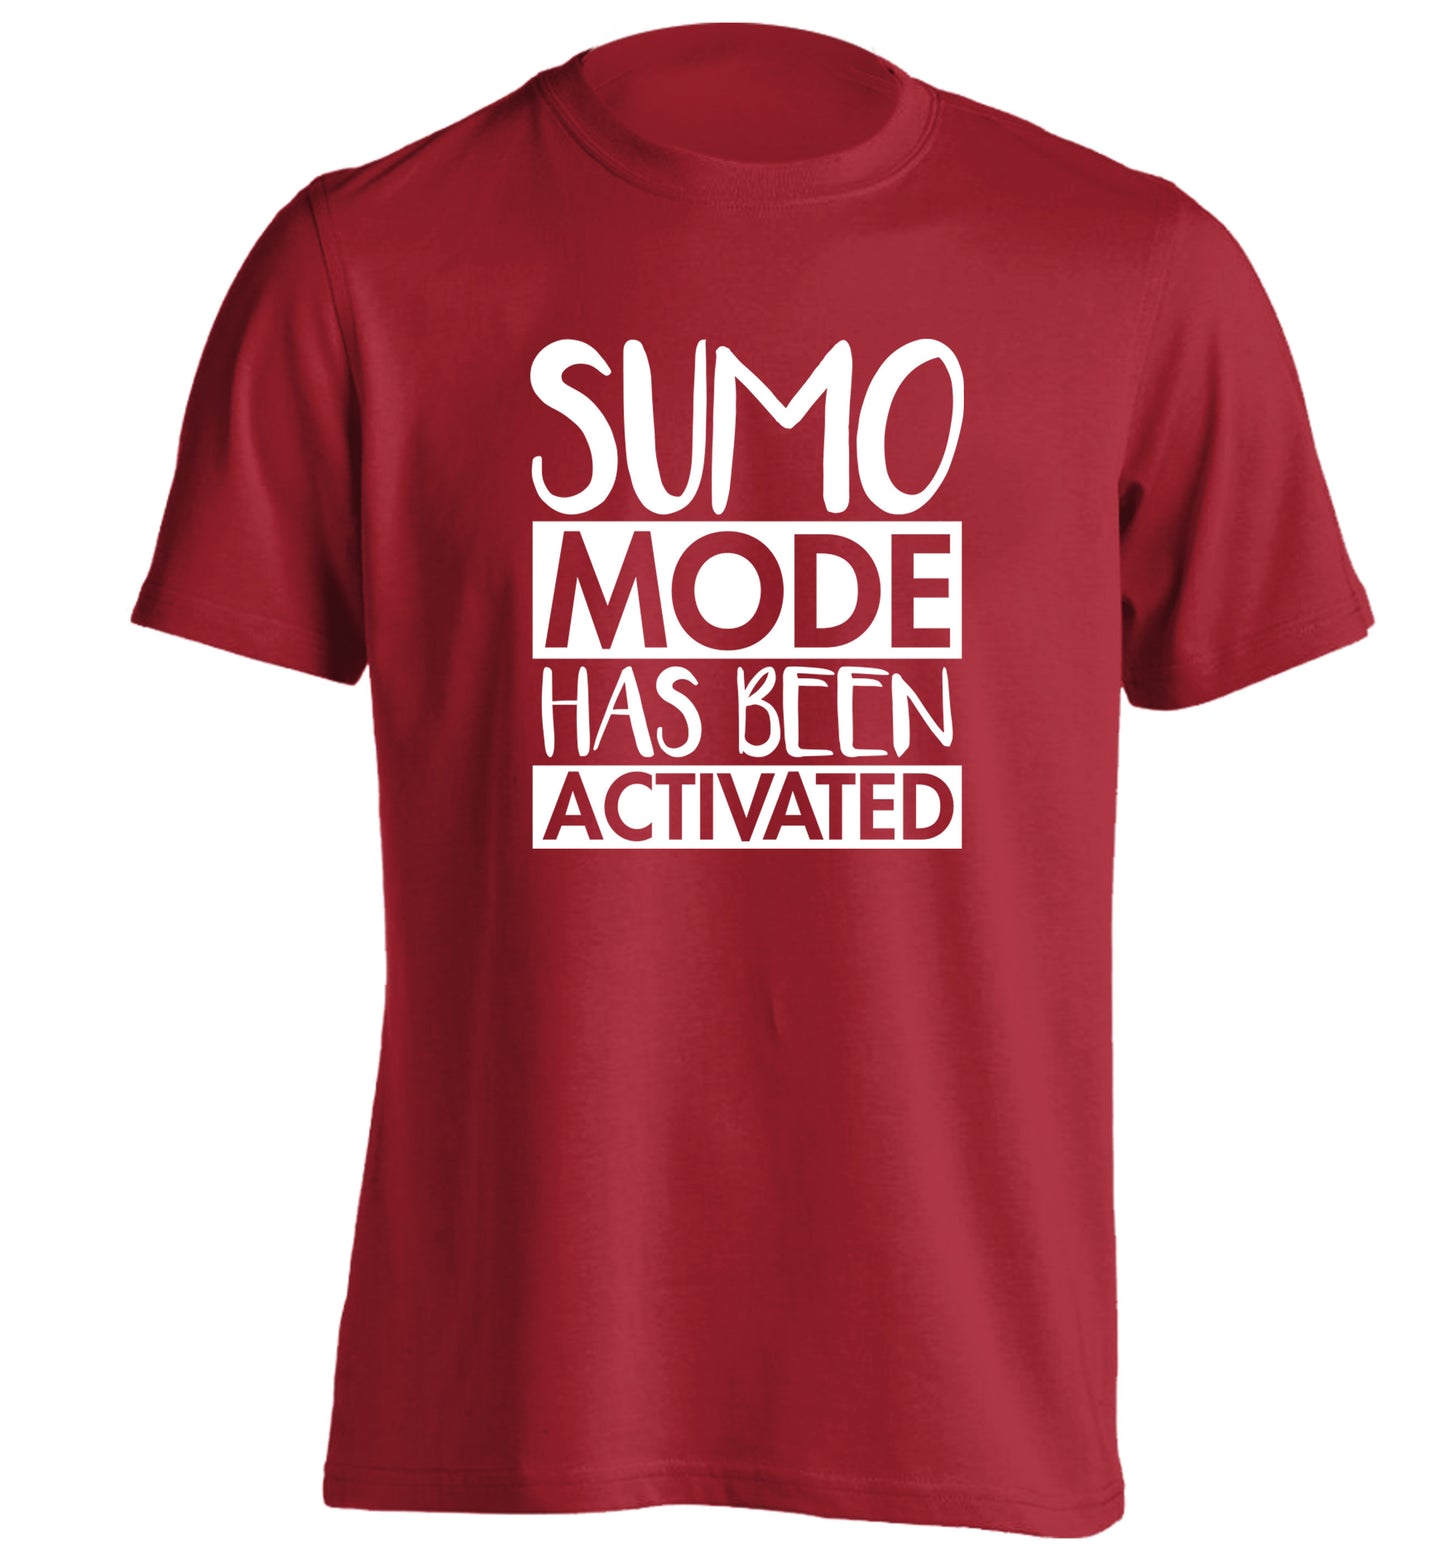 Sumo mode activated adults unisex red Tshirt 2XL